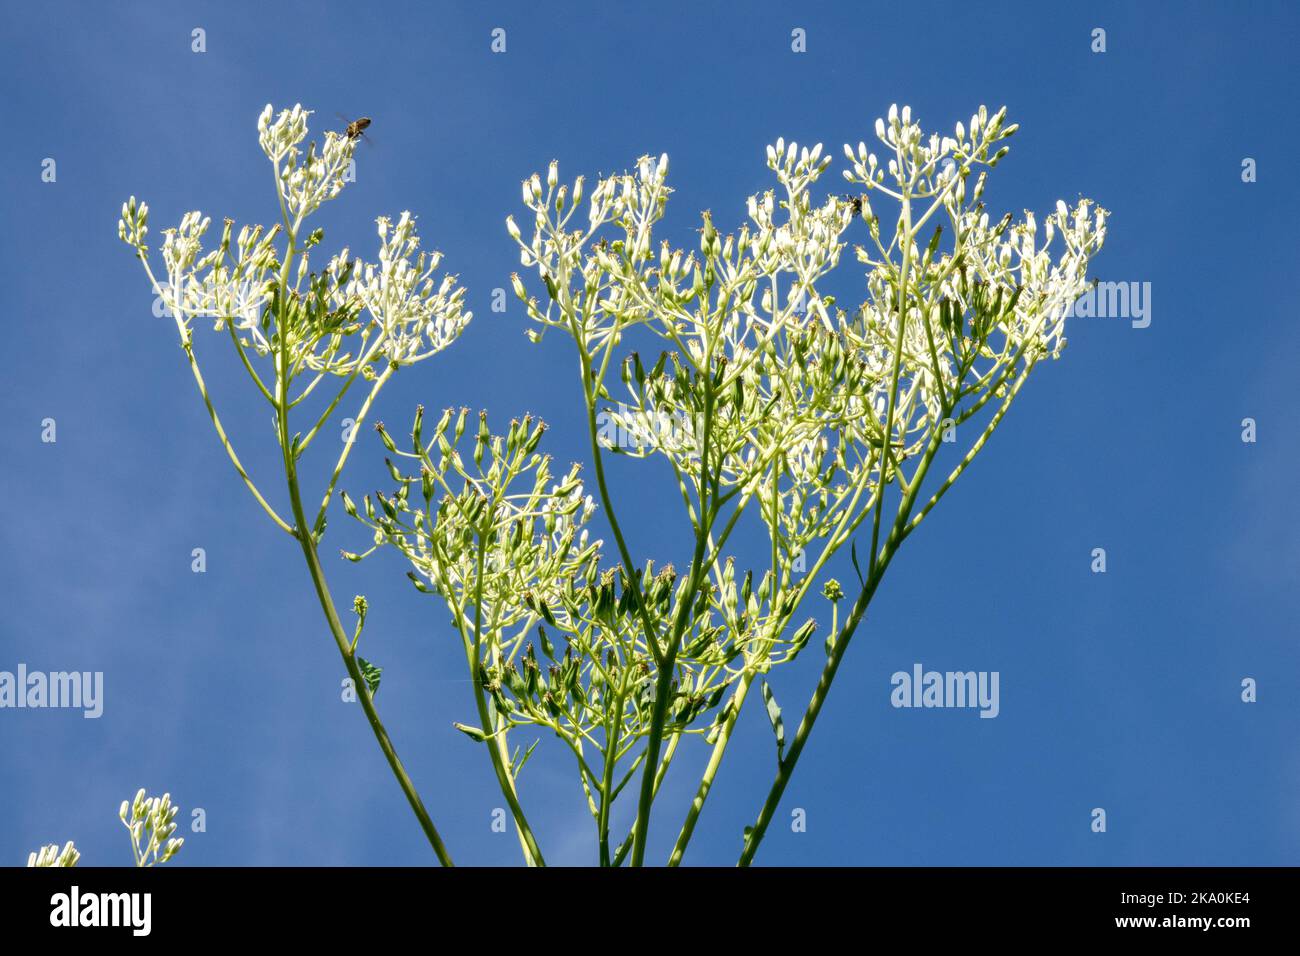 White, Flower Head, Plant, Pale Indian Plantain, Wild, Flower, Herbaceous, Perennial, Sky, Background Stock Photo